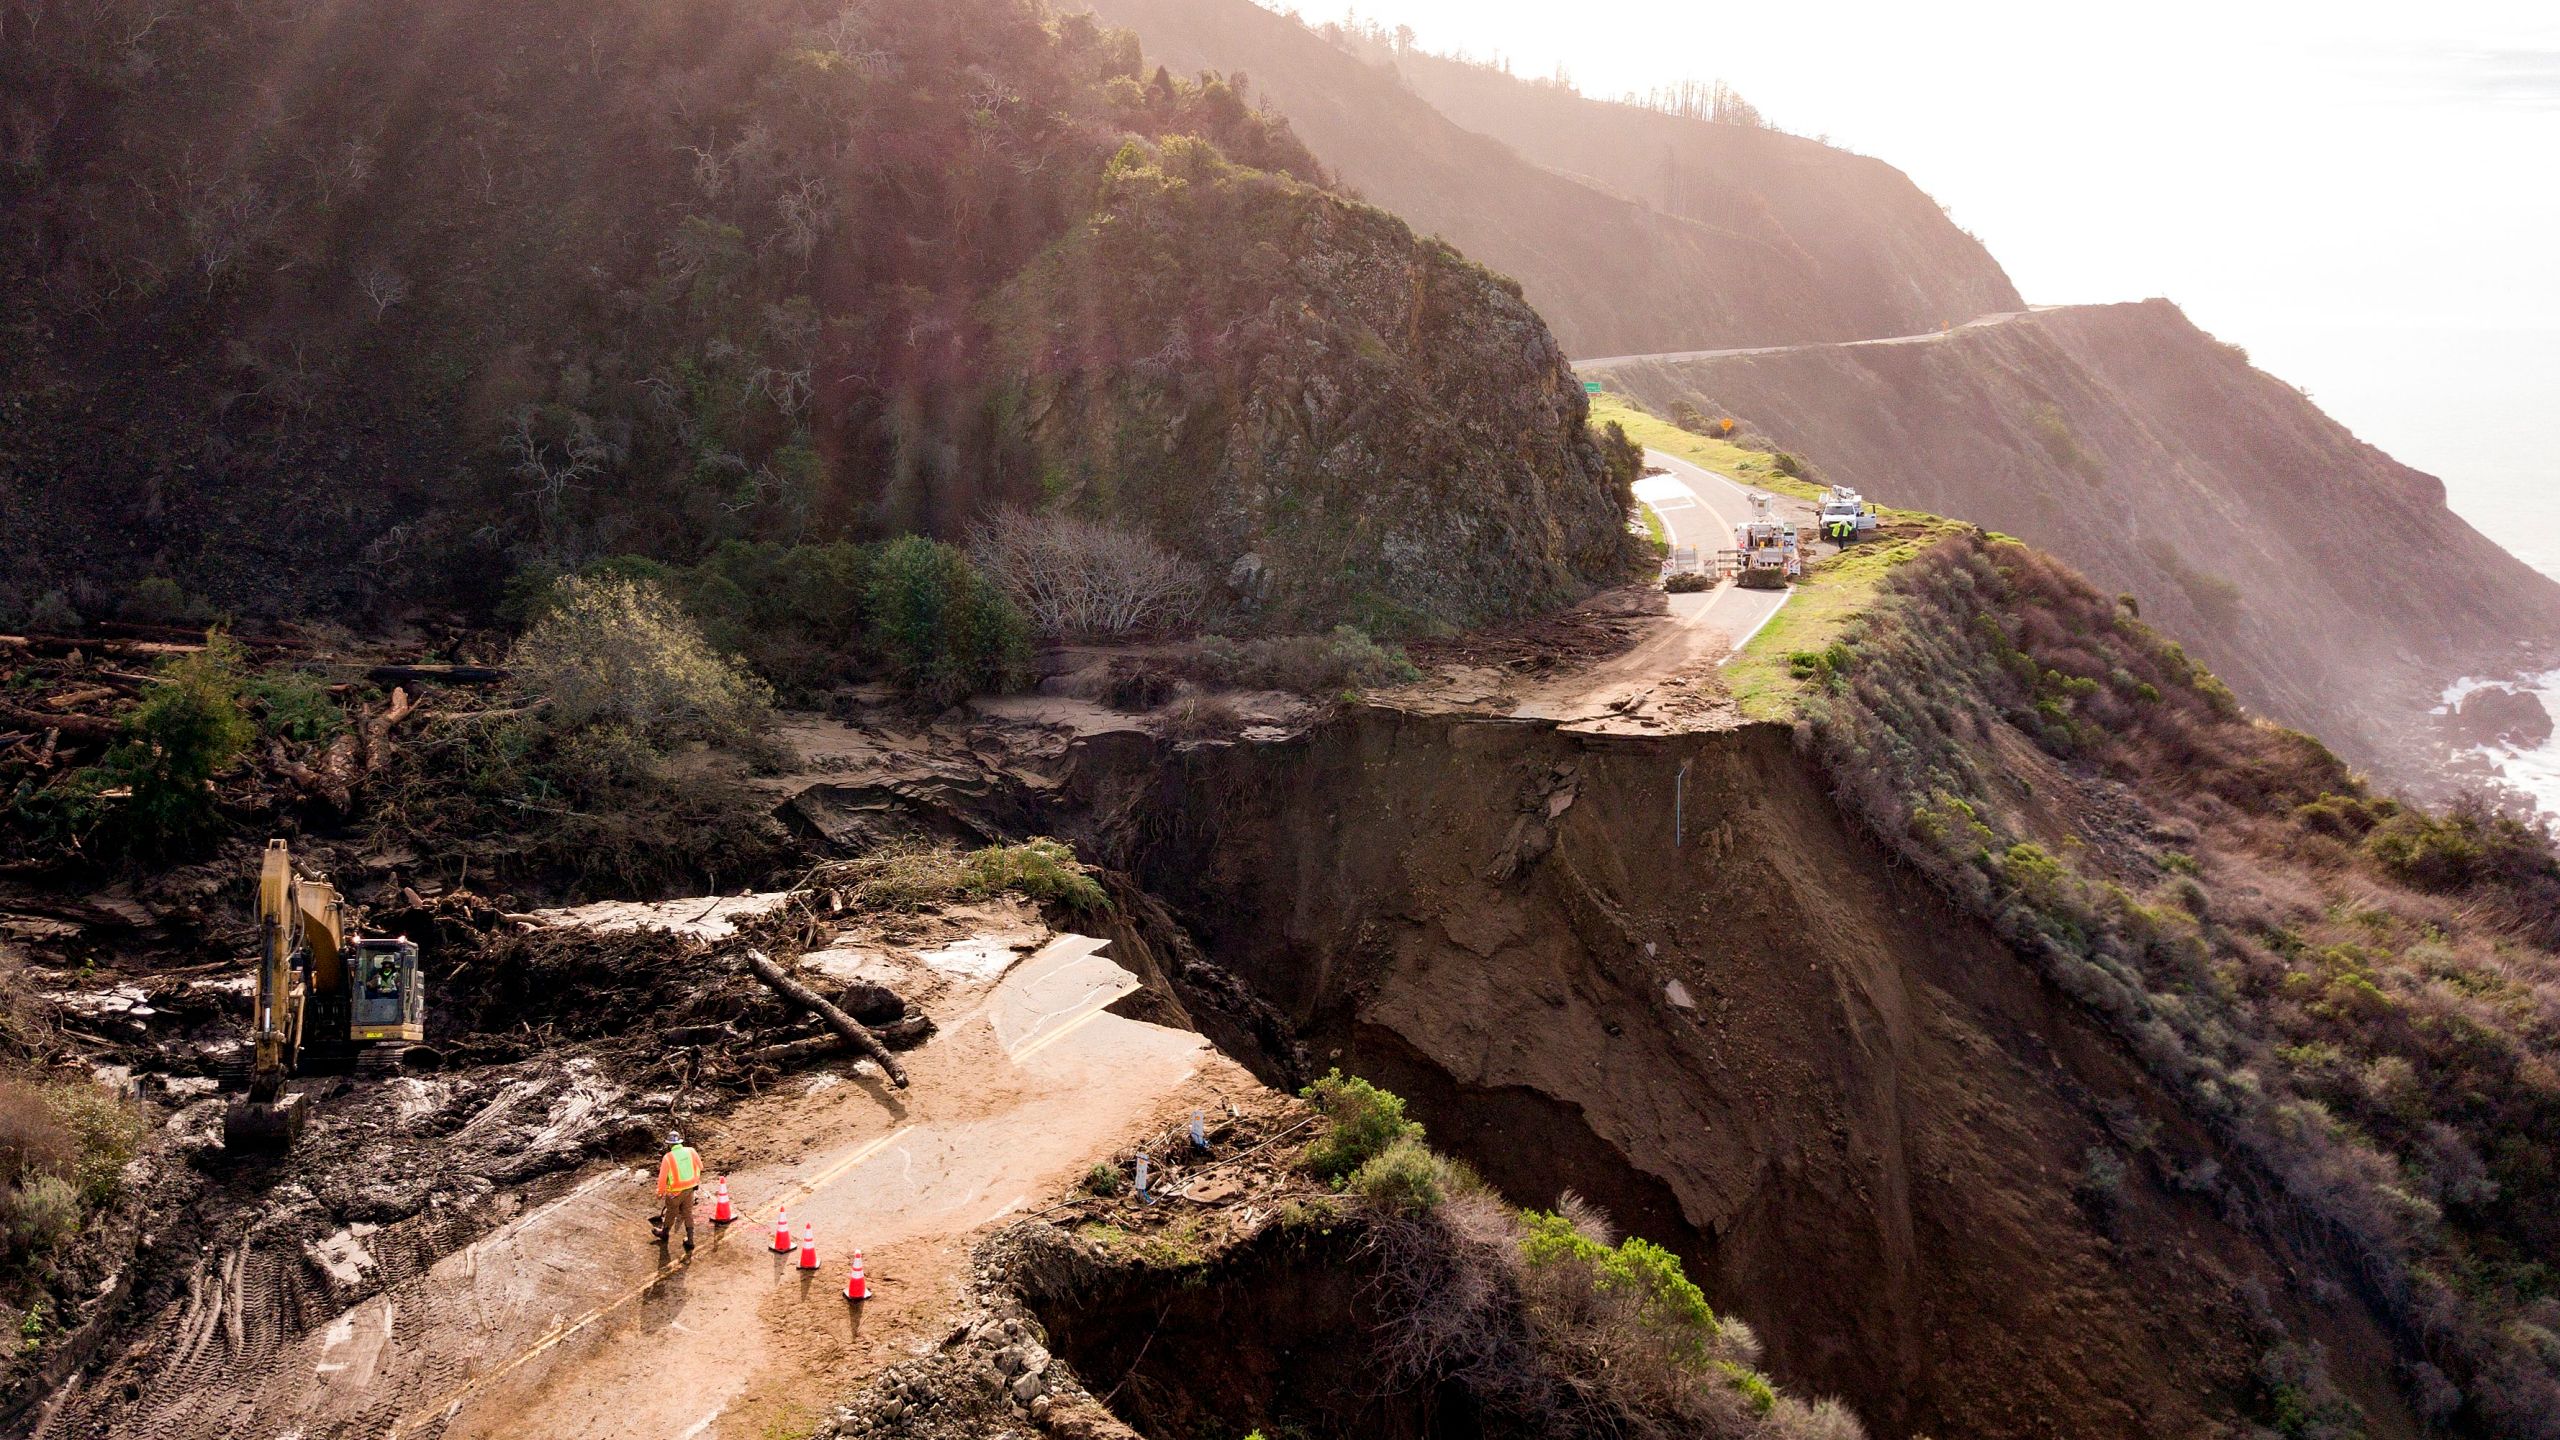 Construction crews work on a section of Highway 1 which collapsed into the Pacific Ocean near Big Sur, California on 31 January 2021. Heavy rains caused debris flows of trees, boulders, and mud that washed out a 150-foot section of the road. Photo: Josh Edelson / AFP / Getty Images